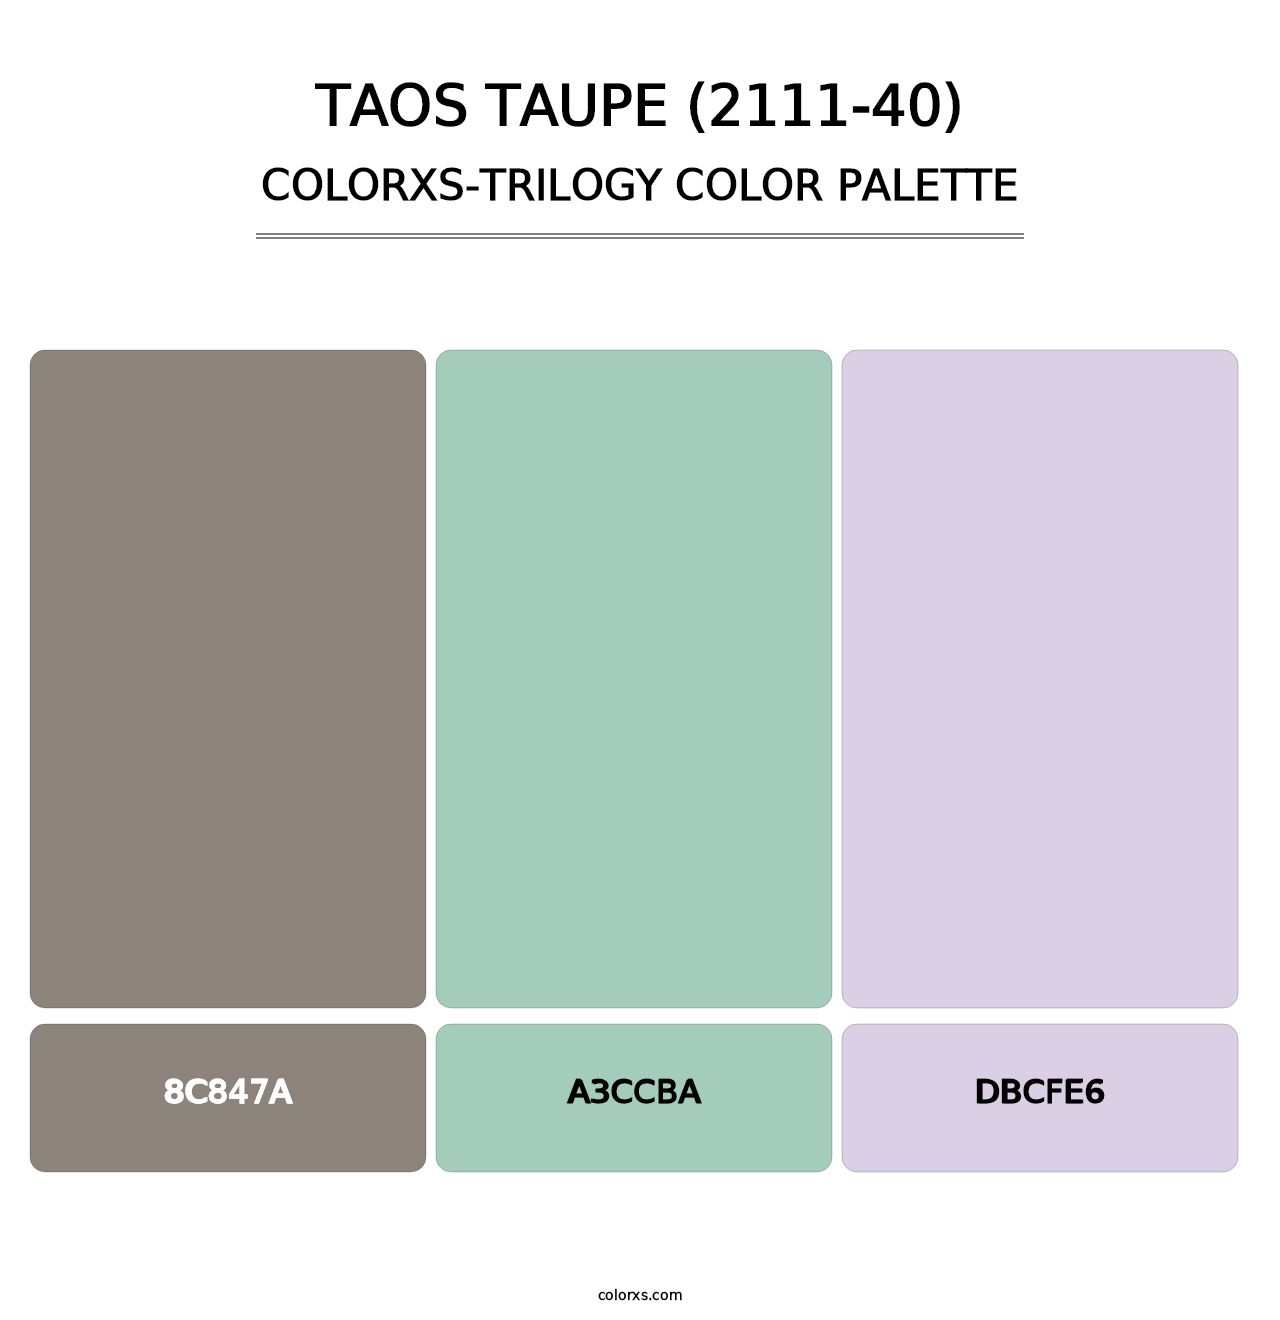 Taos Taupe (2111-40) - Colorxs Trilogy Palette